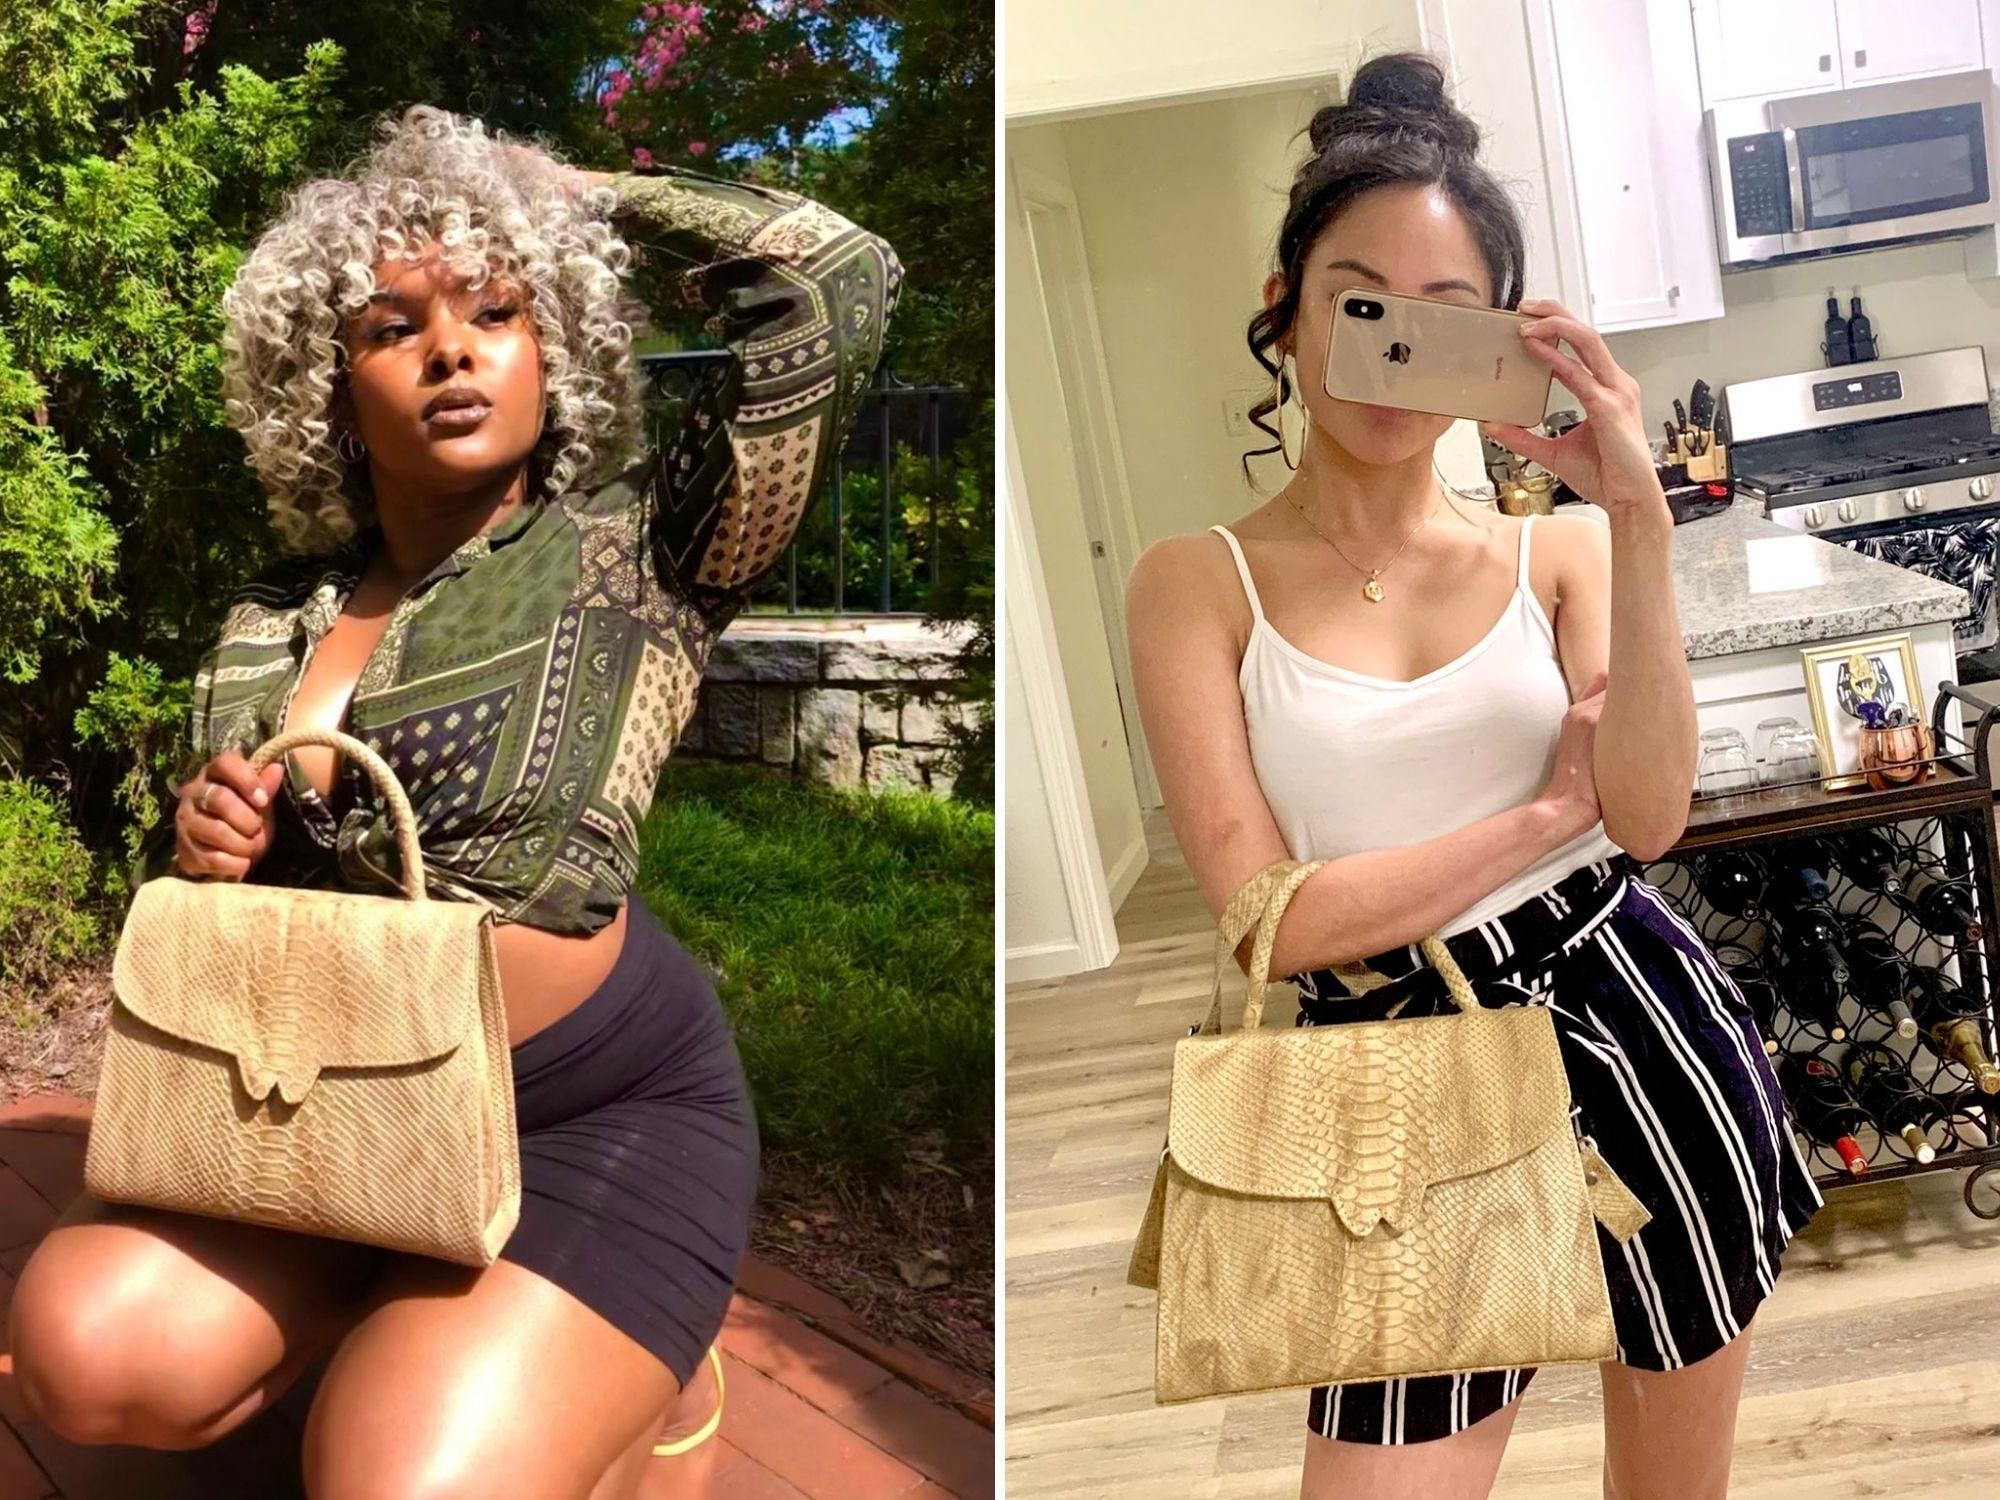 Two photos of people holding the same tan-colored leather handbag, which has a textured appearance and a top handle.